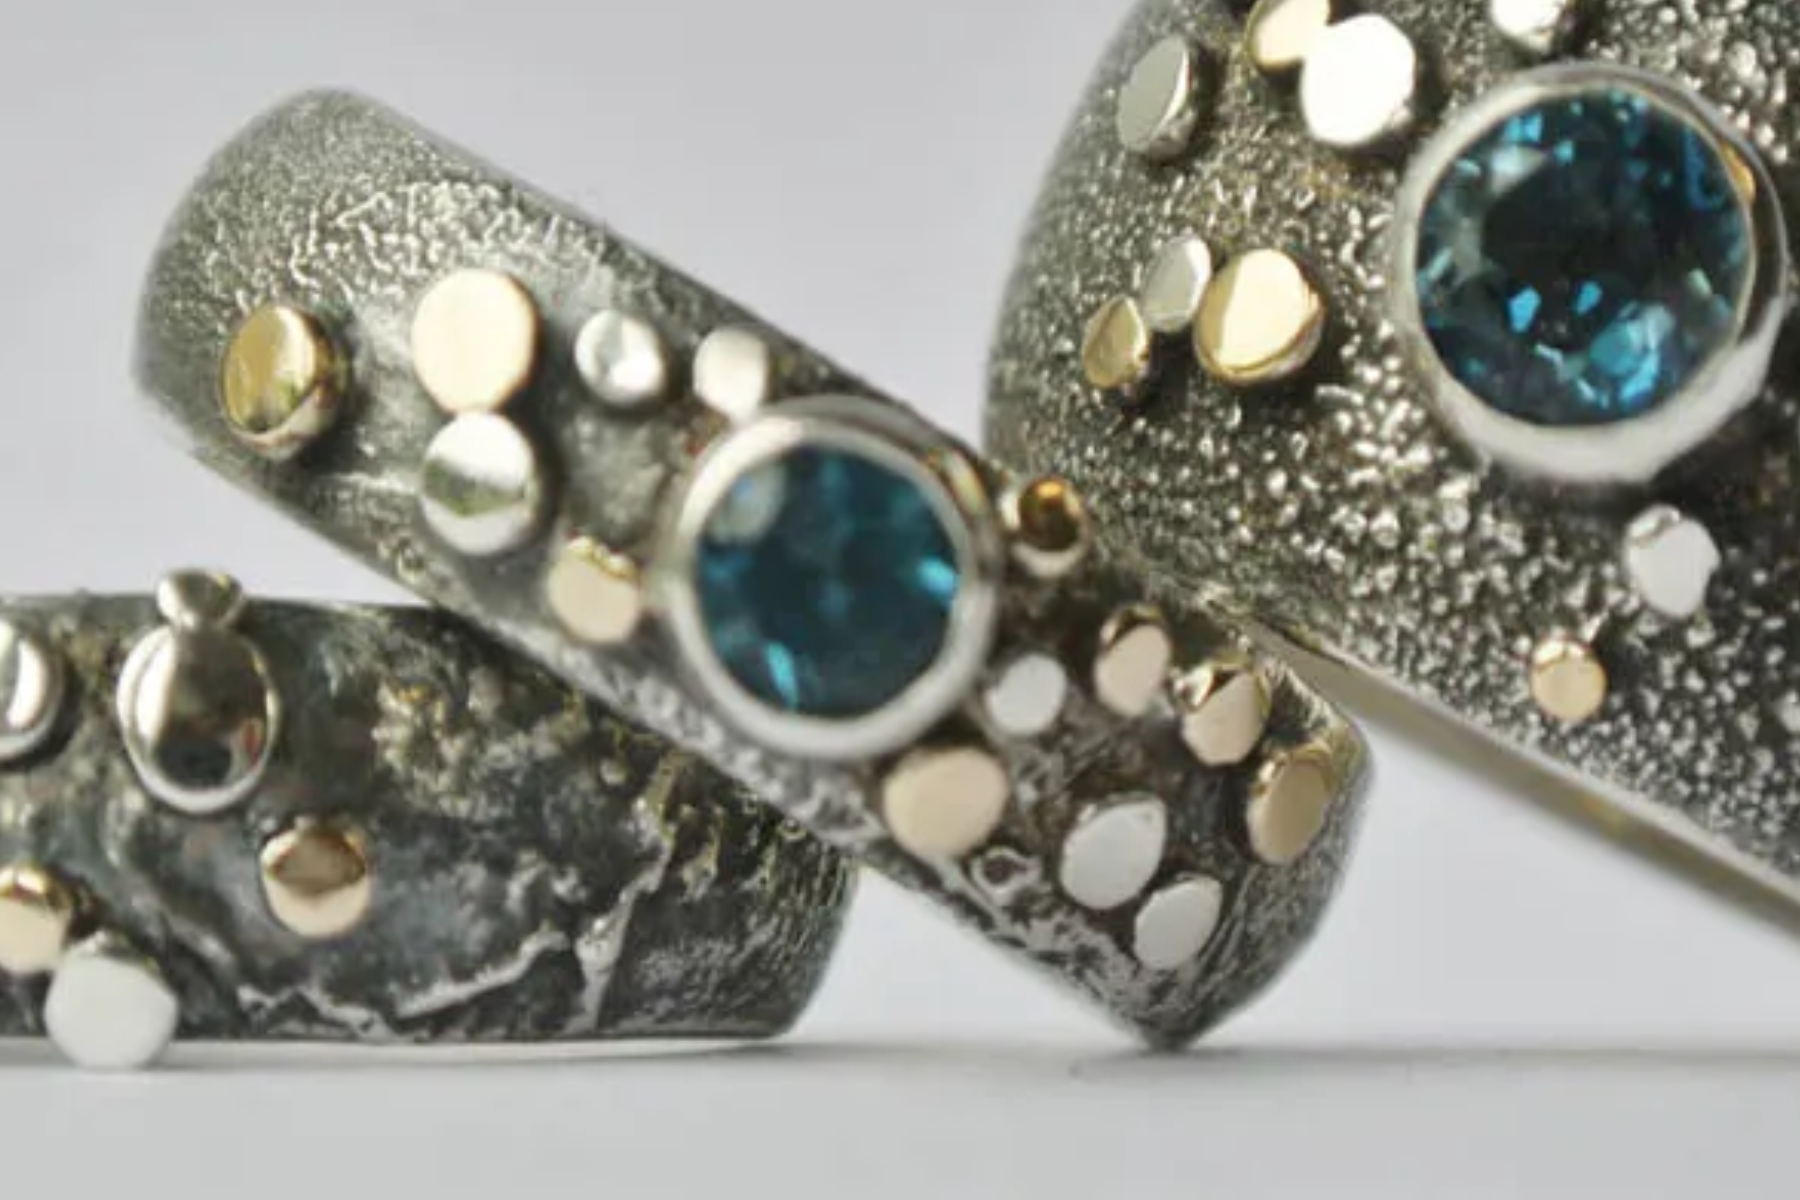 Three blue-stoned silver rings